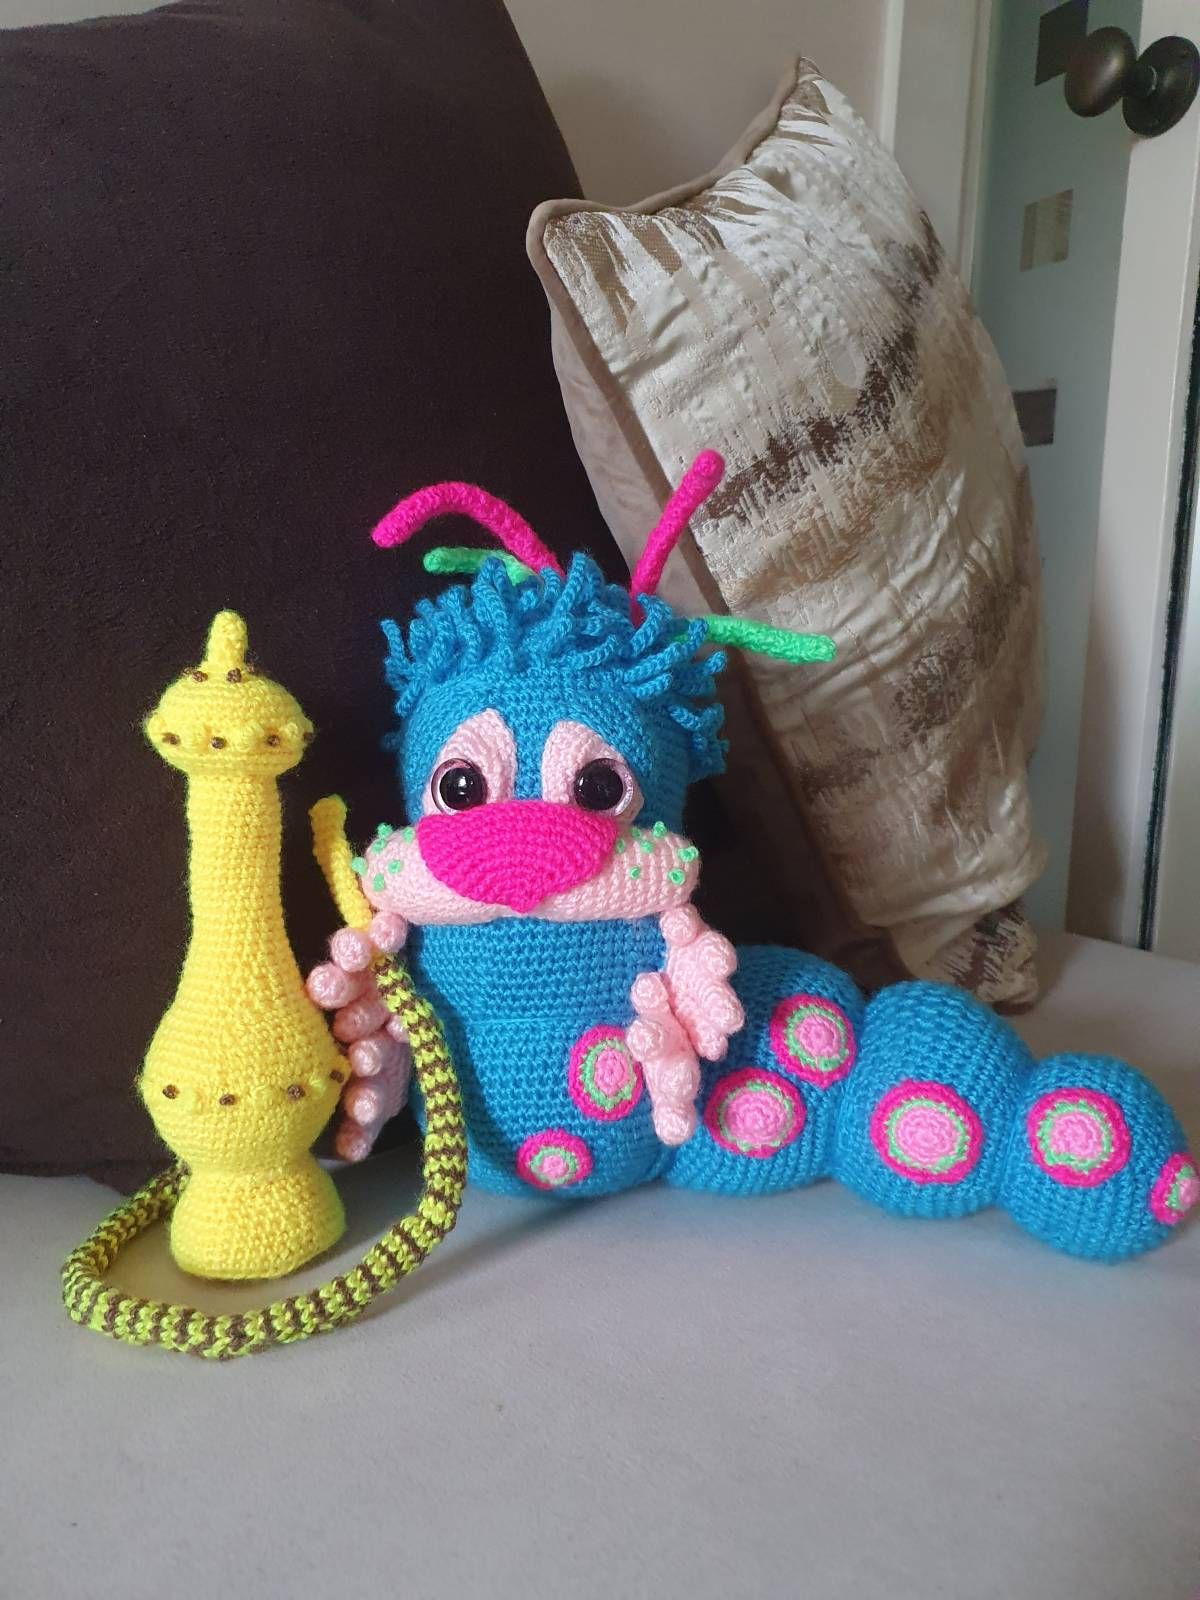 Blue Crochet Caterpillar Amigurumi Pattern Review by Helen Mason for Cottontail Whiskers